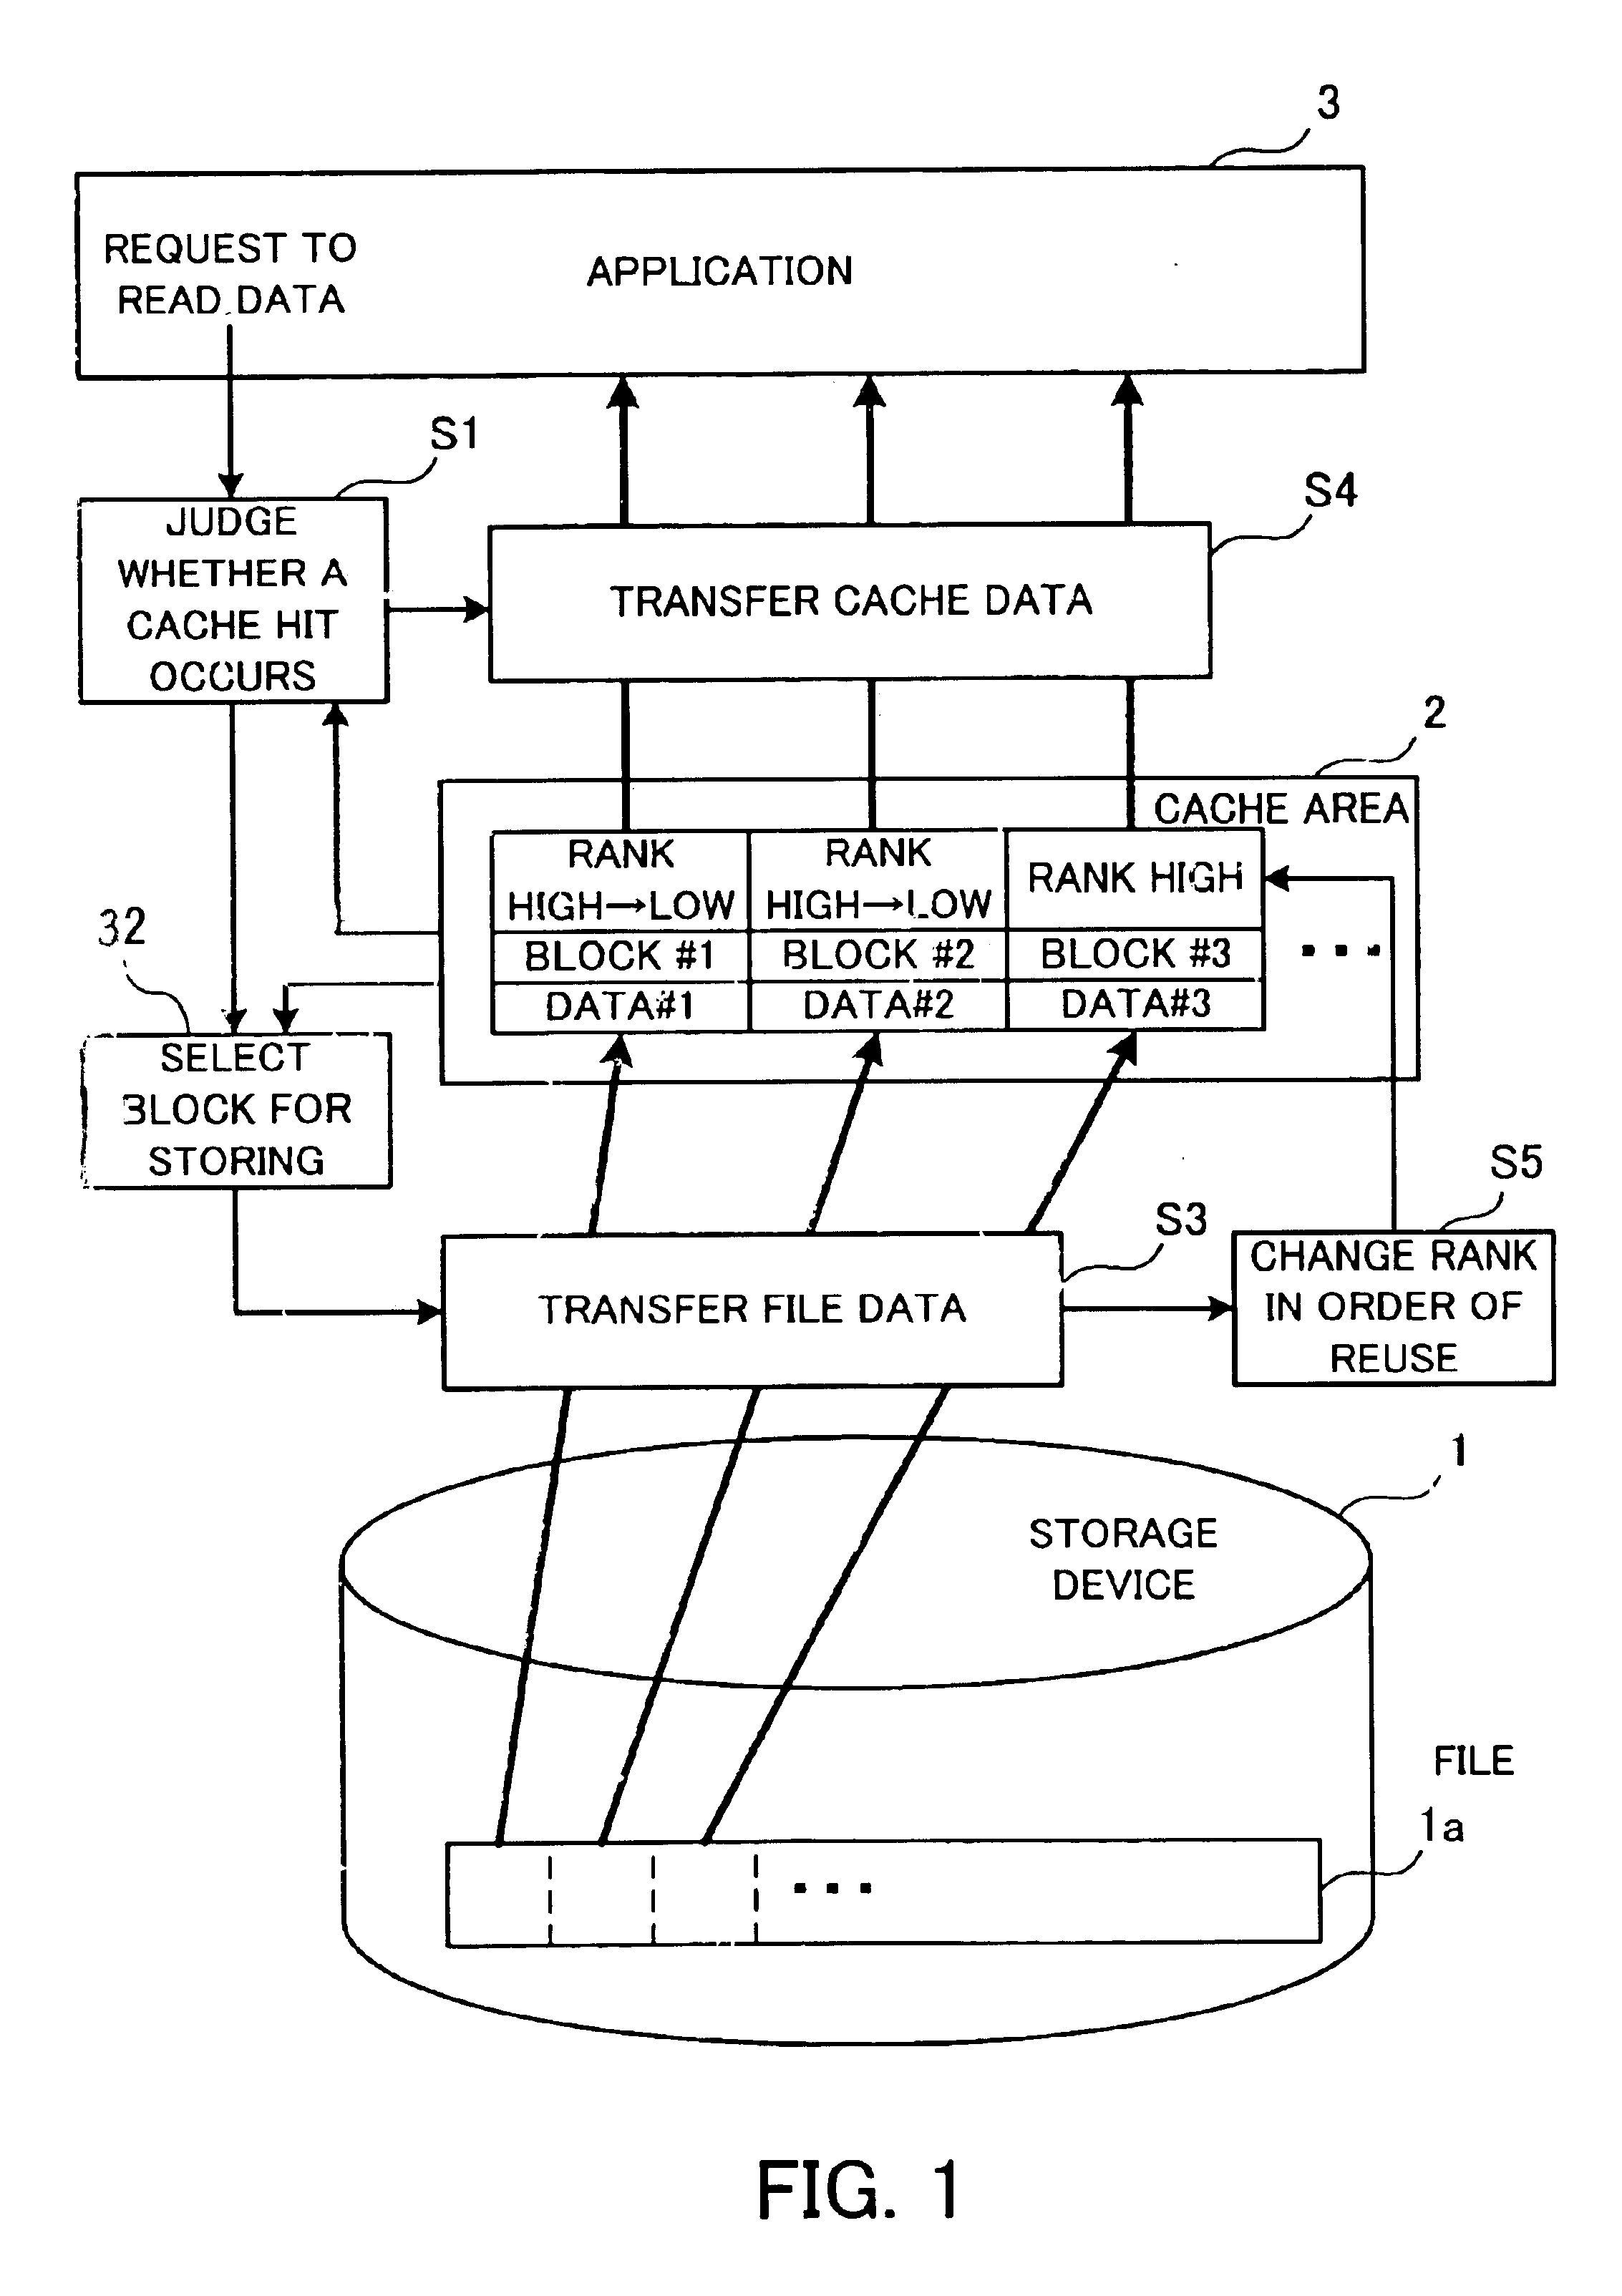 Cache control program and computer for performing cache processes utilizing cache blocks ranked according to their order of reuse